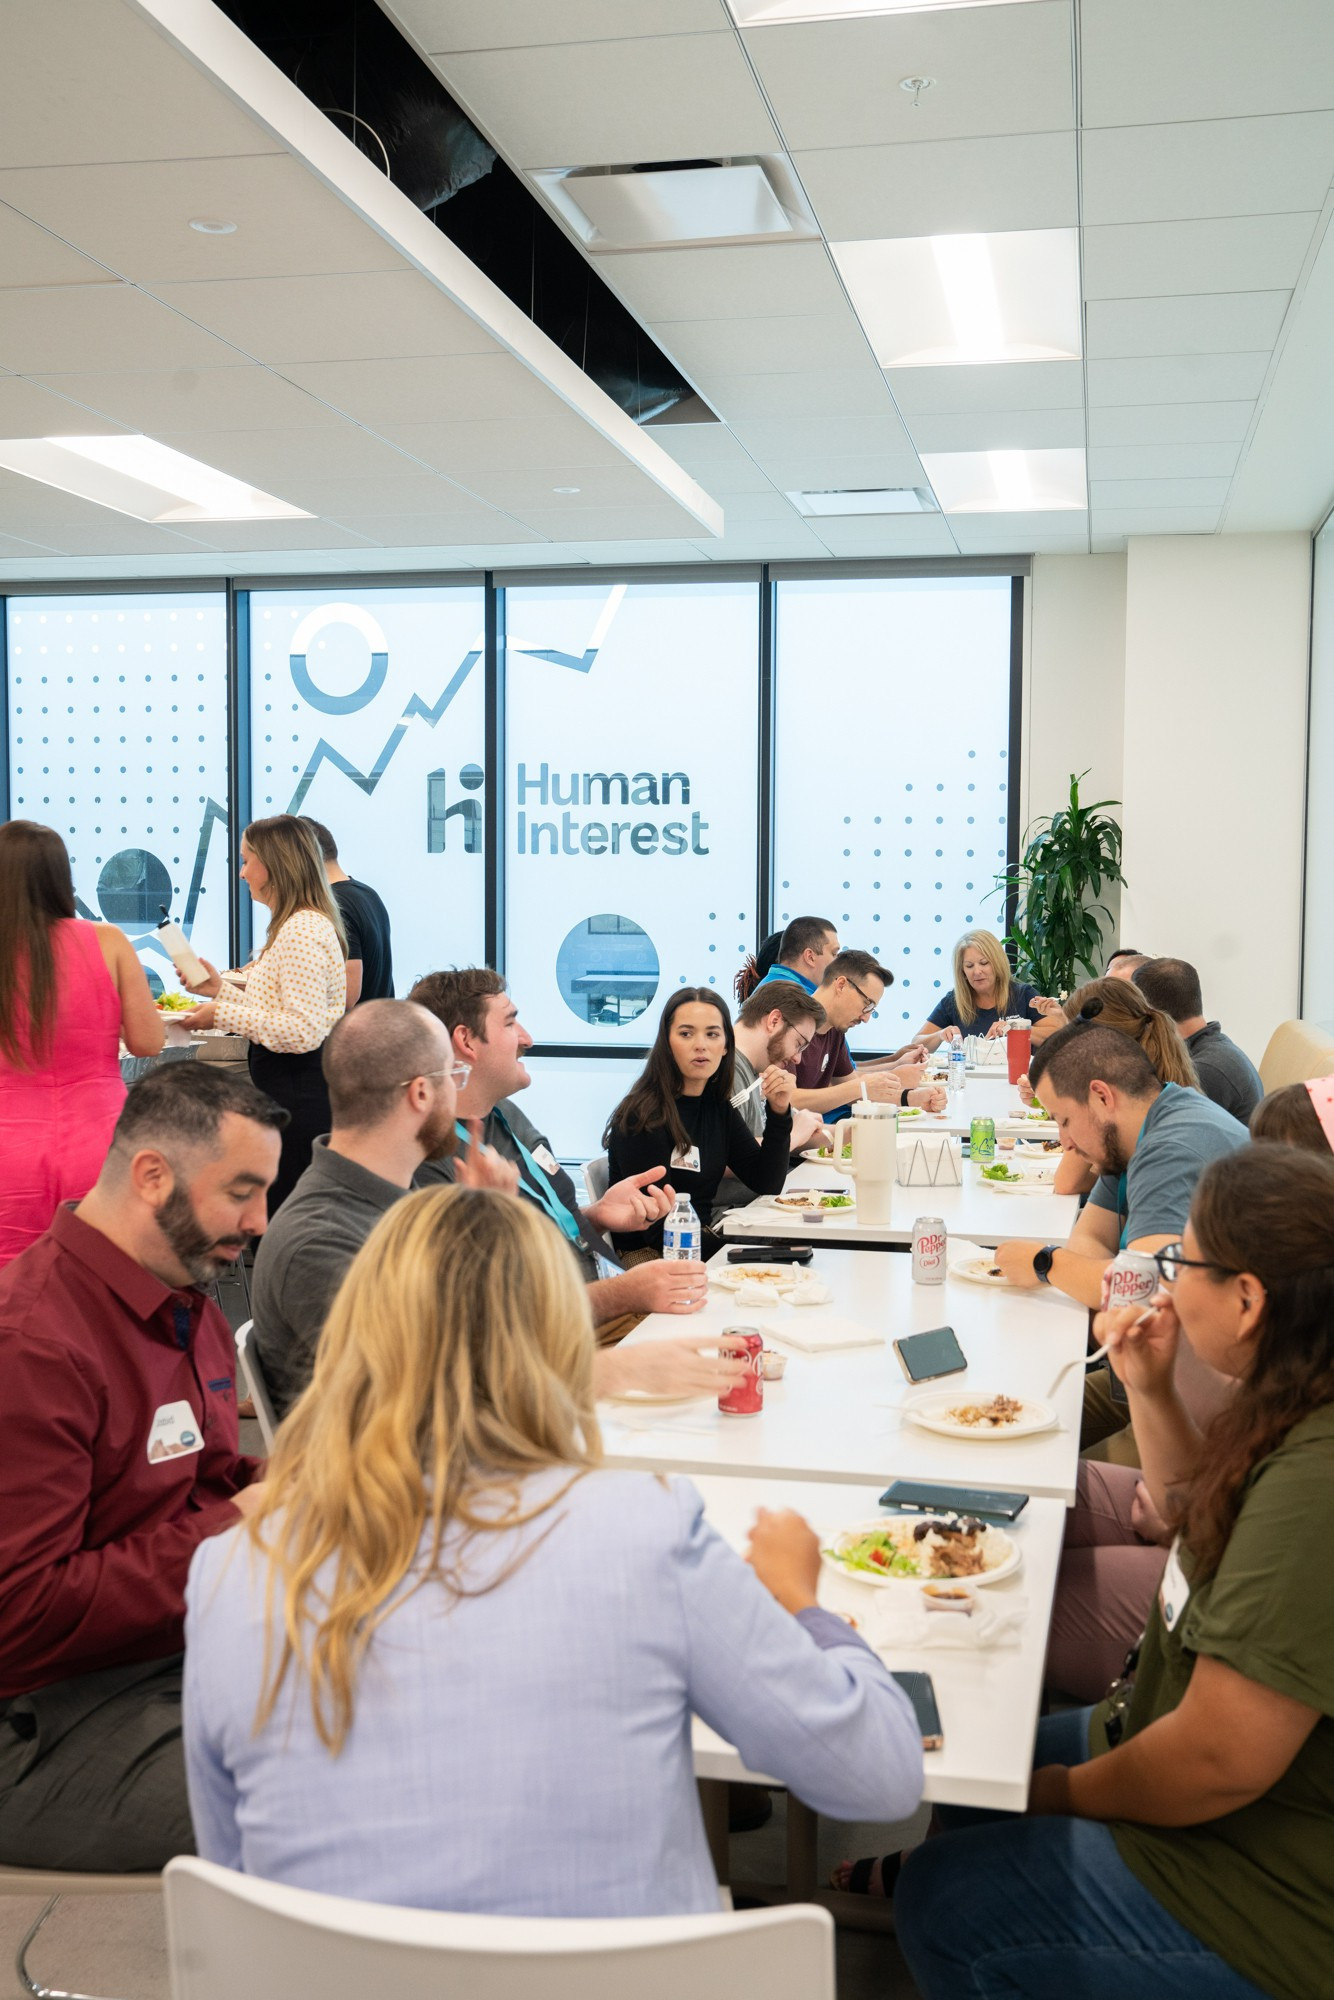 The Human Interest headquarters serves as a multi-use space to host team training events  